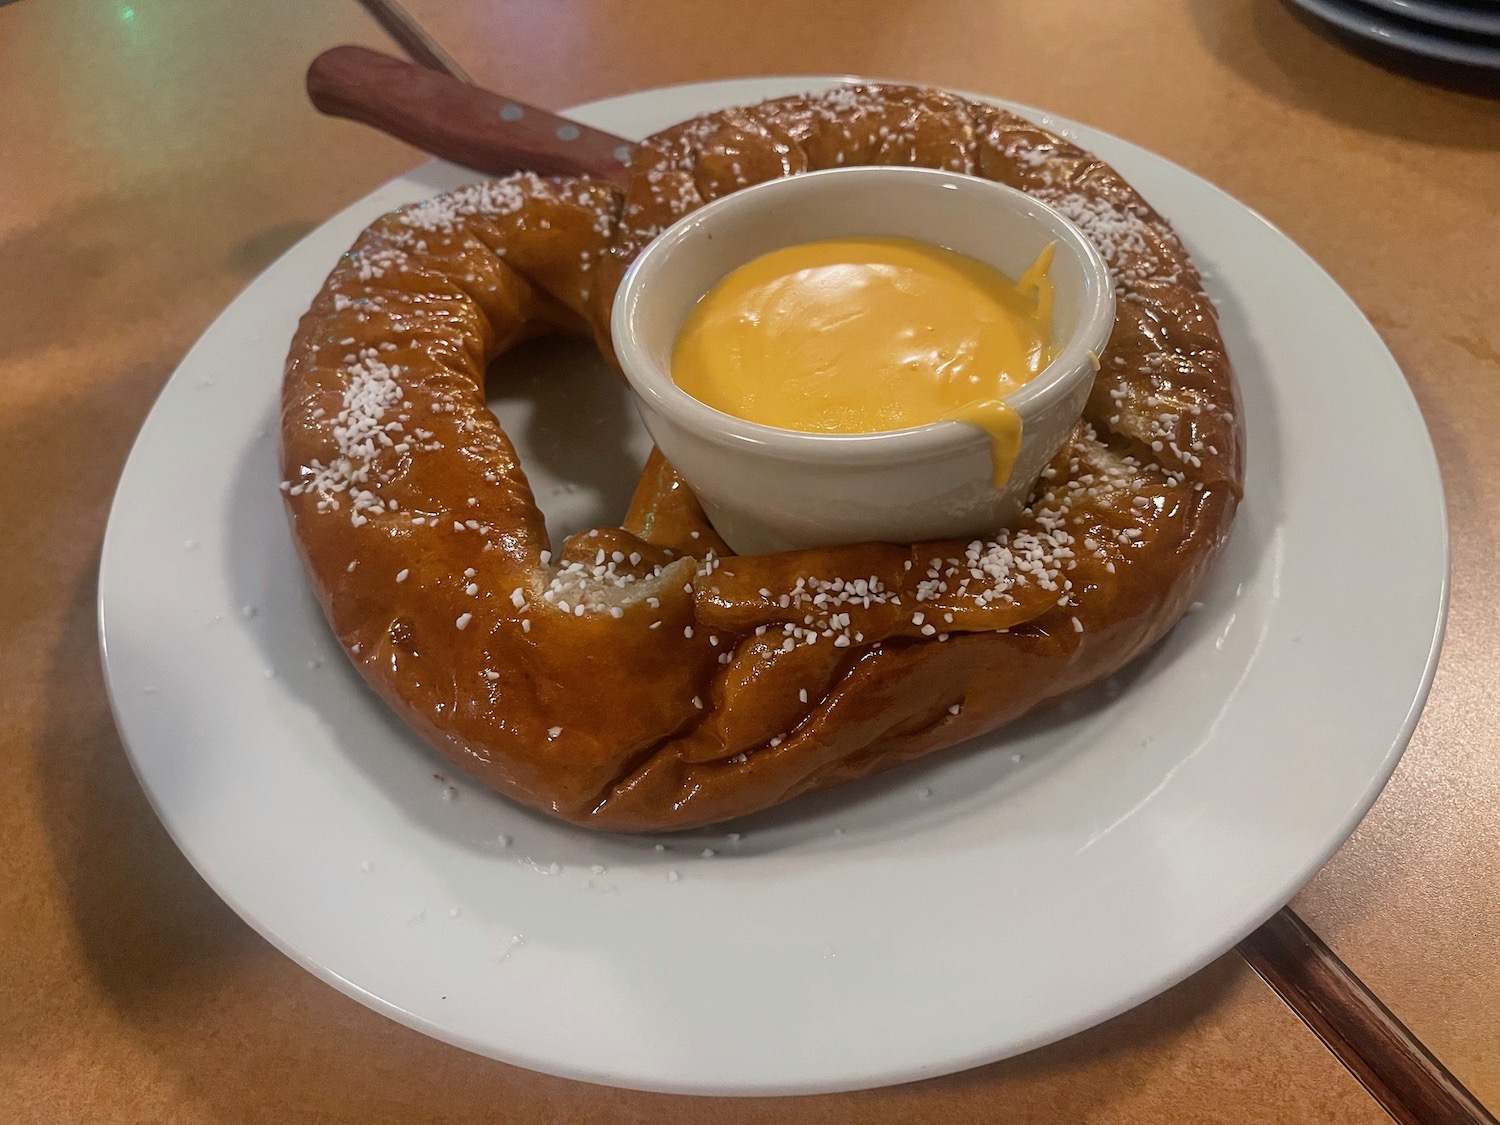 a pretzel with cheese sauce on a plate